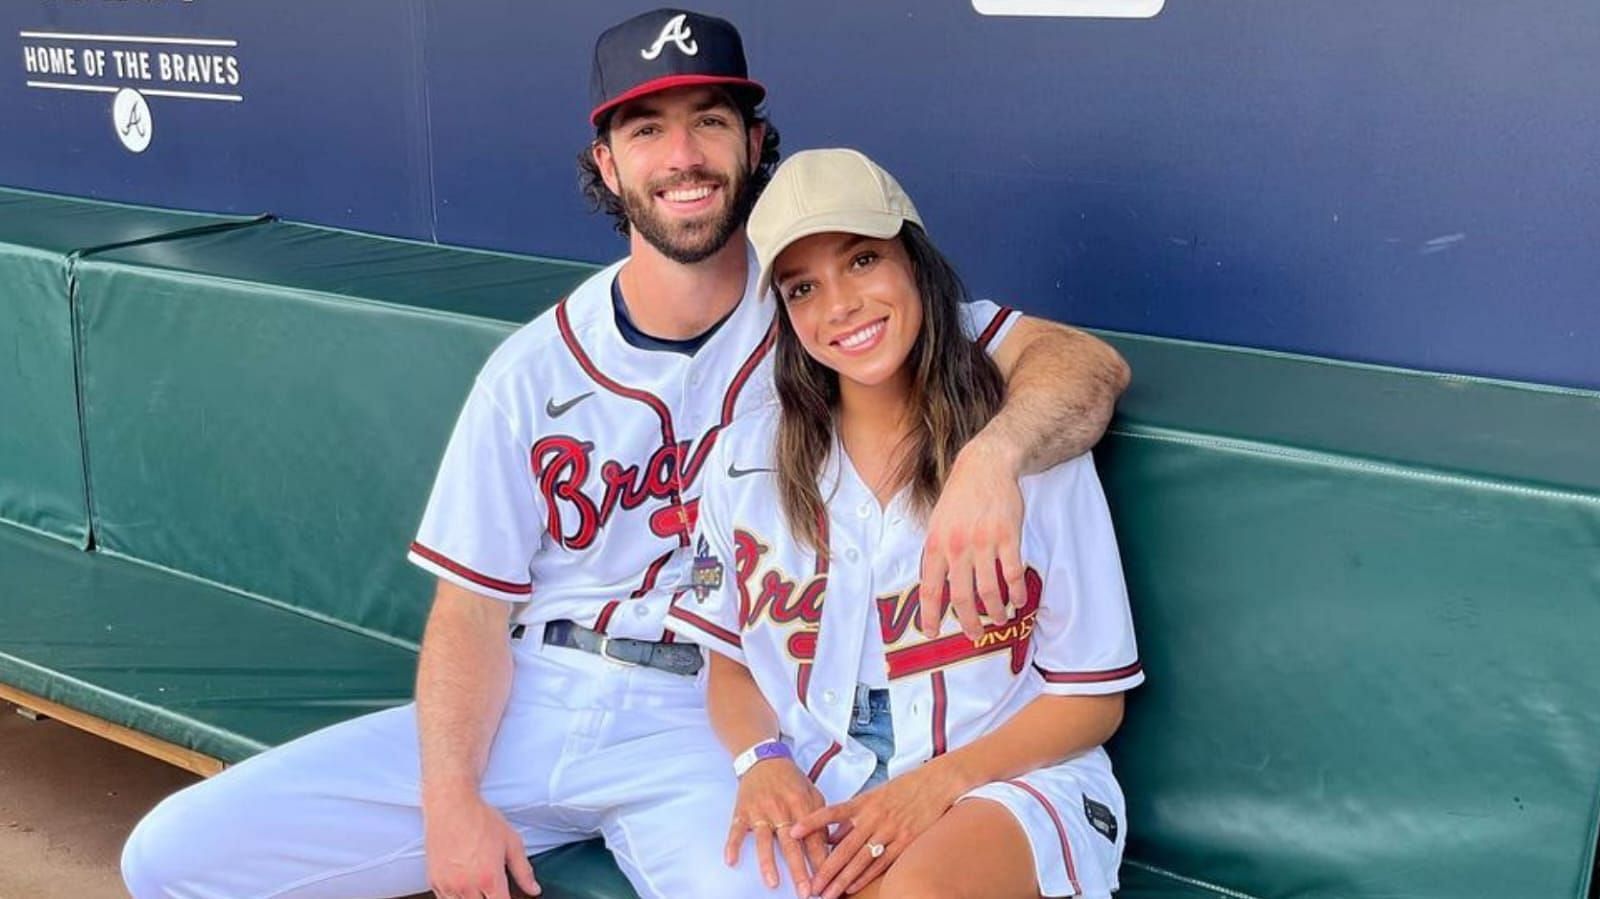 USWNT star Mallory Swanson would have asked for transfer if husband Dansby  Swanson hadn't signed with Chicago Cubs